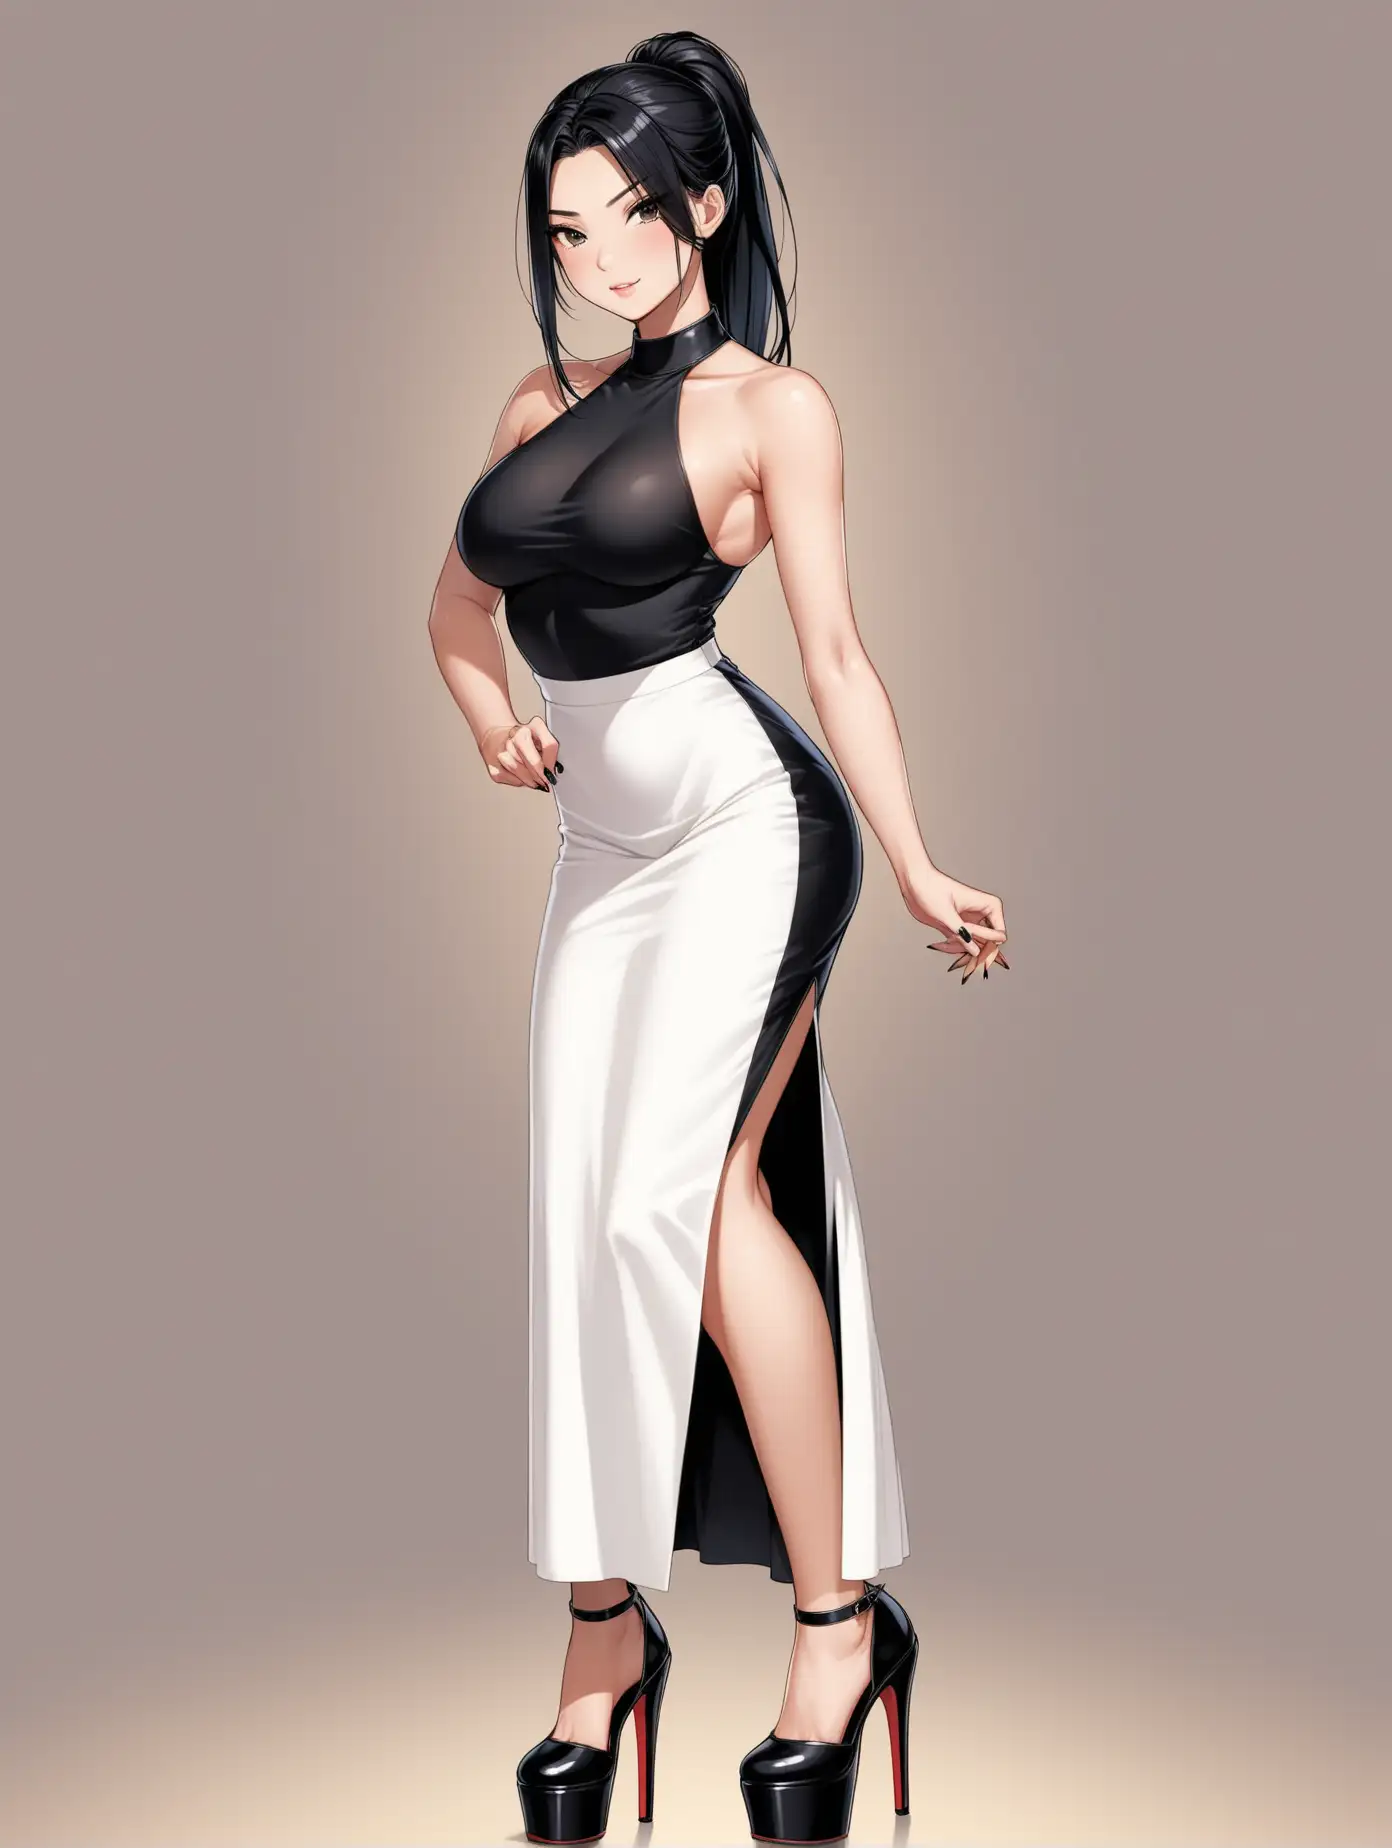 Full body image of a hot court woman with black hair, ponytail and platform high heels